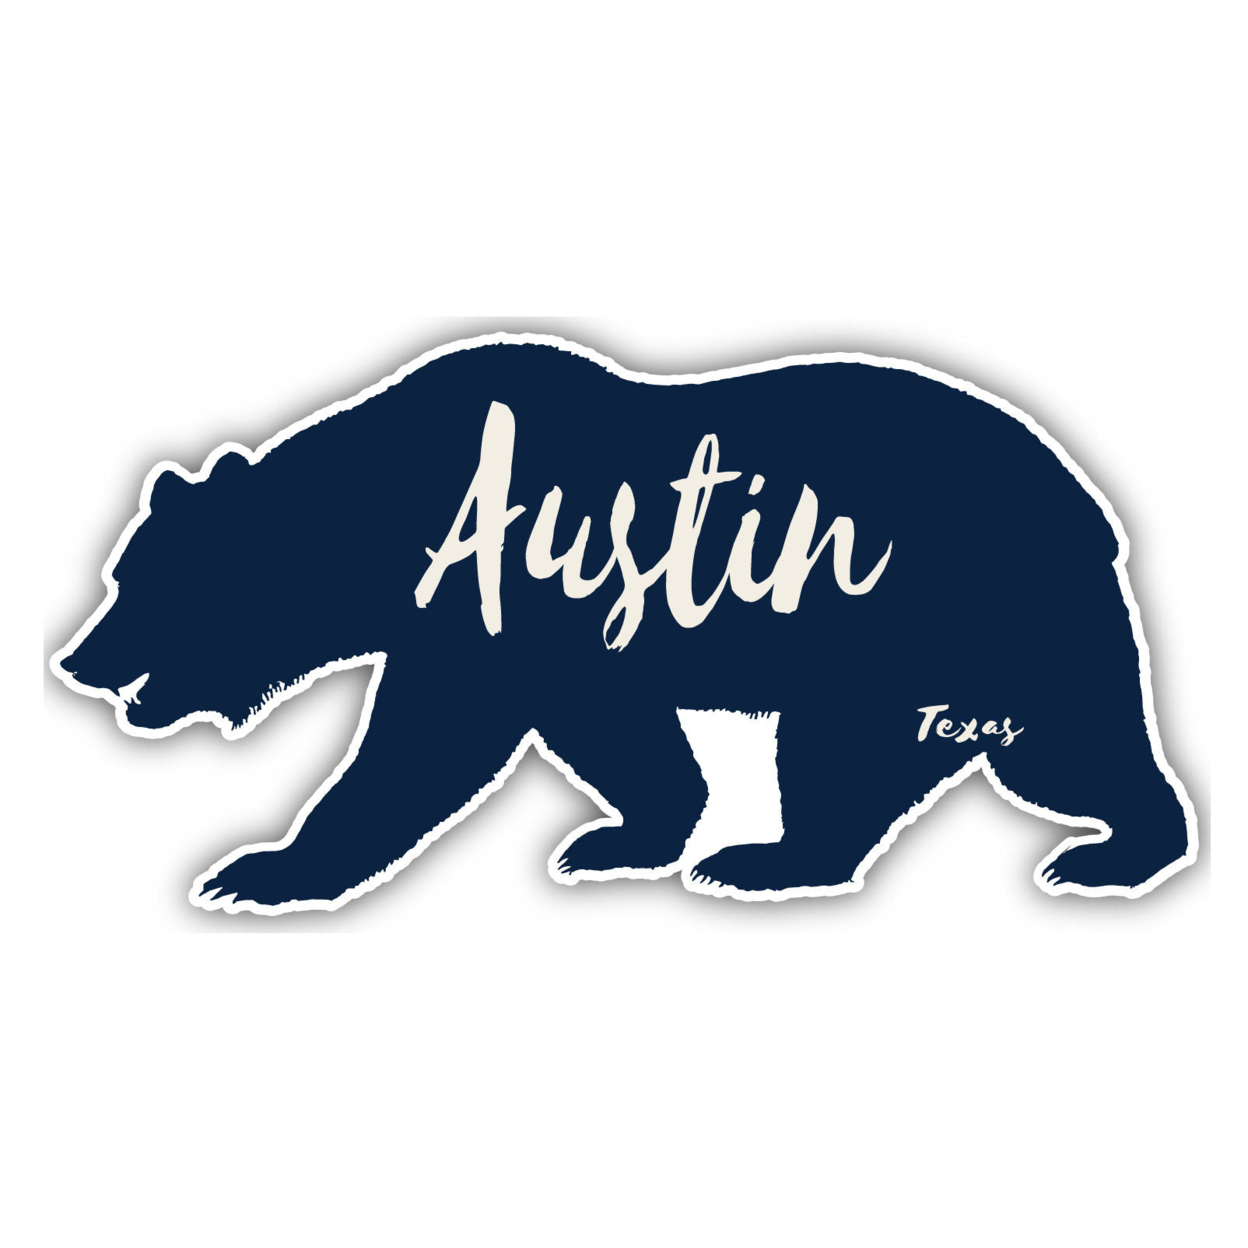 Austin Texas Souvenir Decorative Stickers (Choose Theme And Size) - 4-Pack, 8-Inch, Great Outdoors